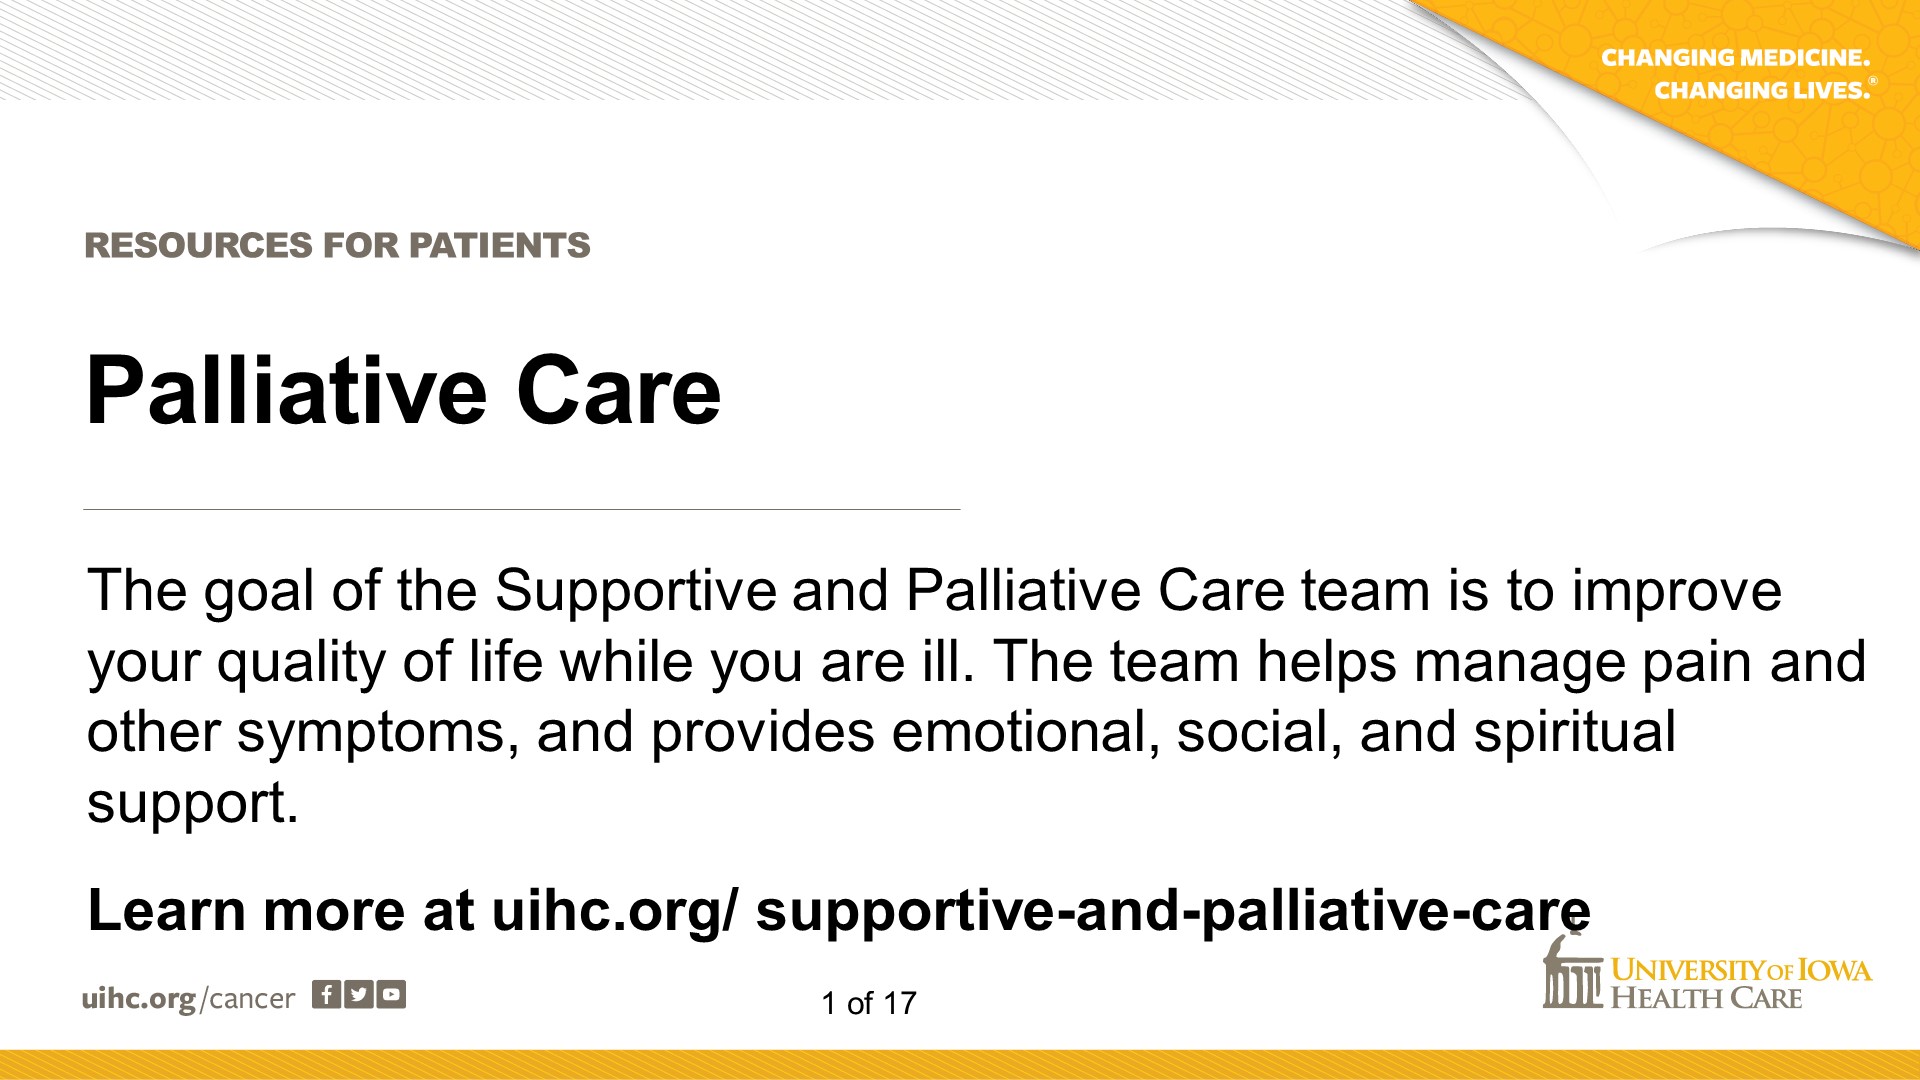 The goal of the Supportive and Palliative Care team is to improve your quality of life while you are ill. The team helps manage pain and other symptoms, and provides emotional, social, and spiritual support.